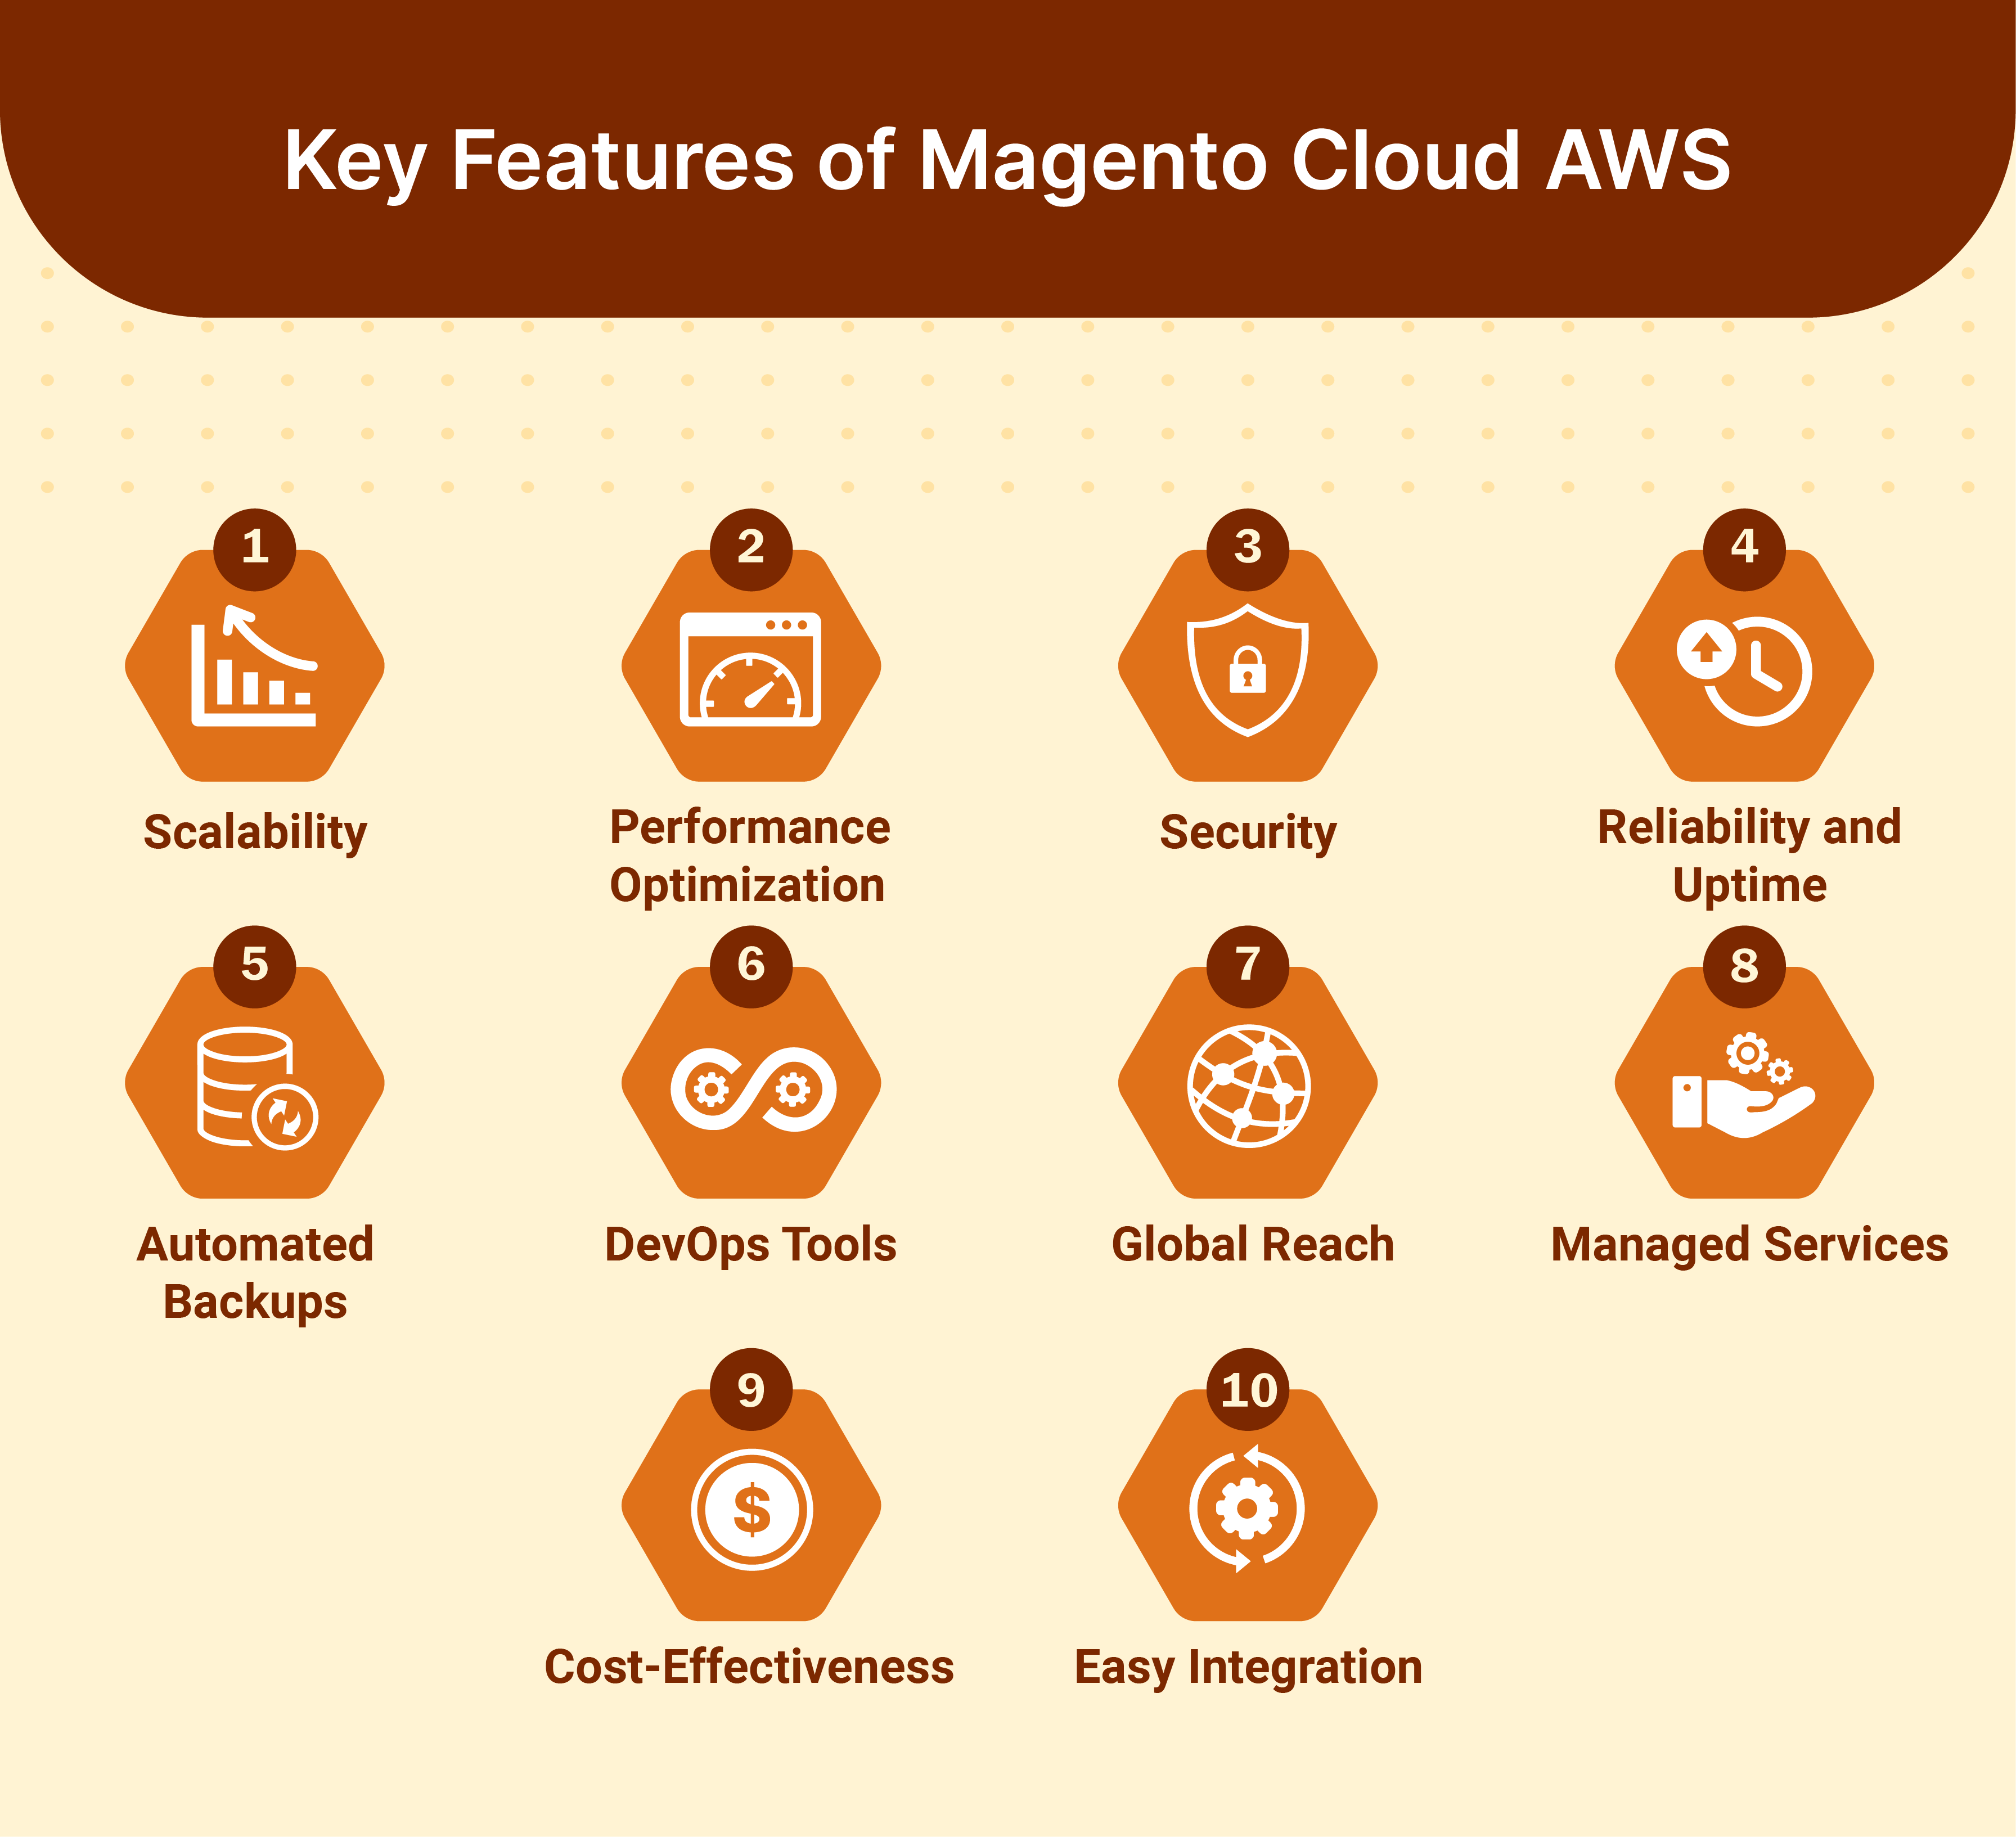 Key Features of Magento Cloud AWS